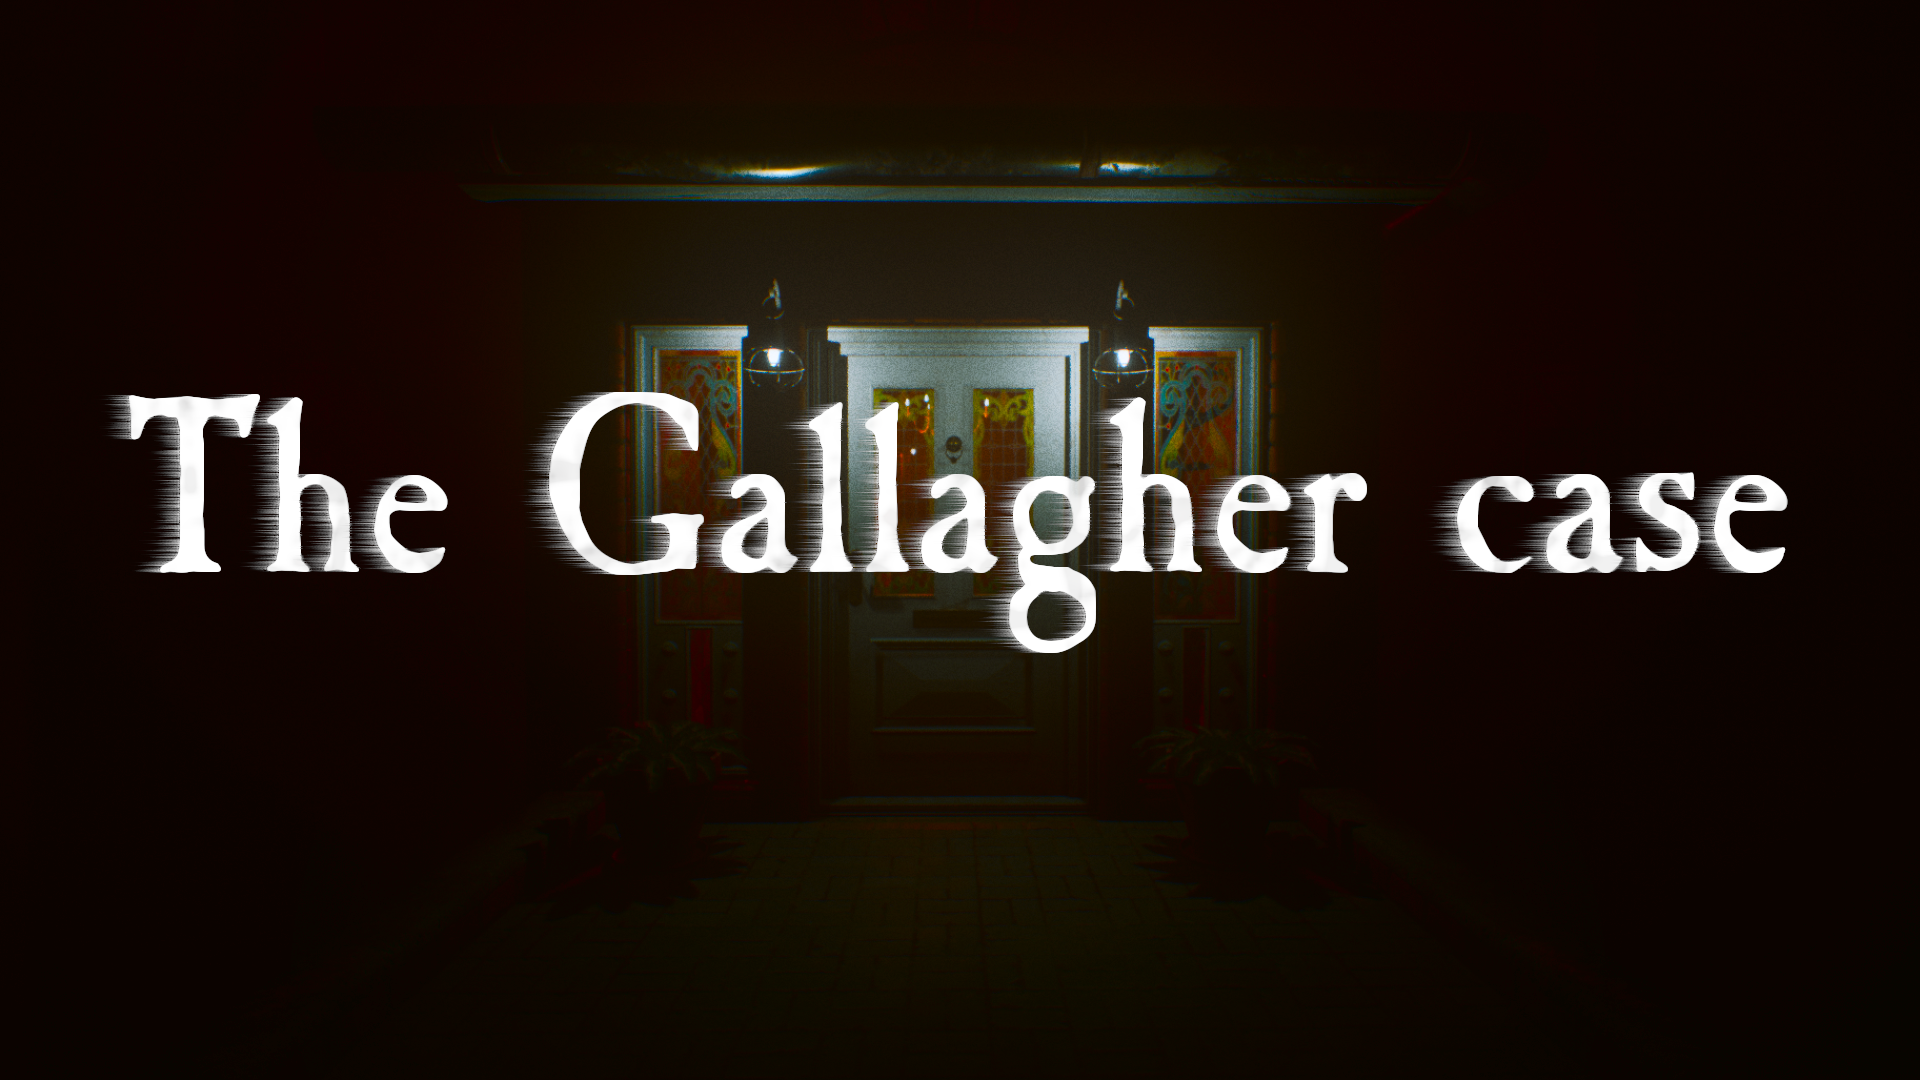 The Gallagher Case